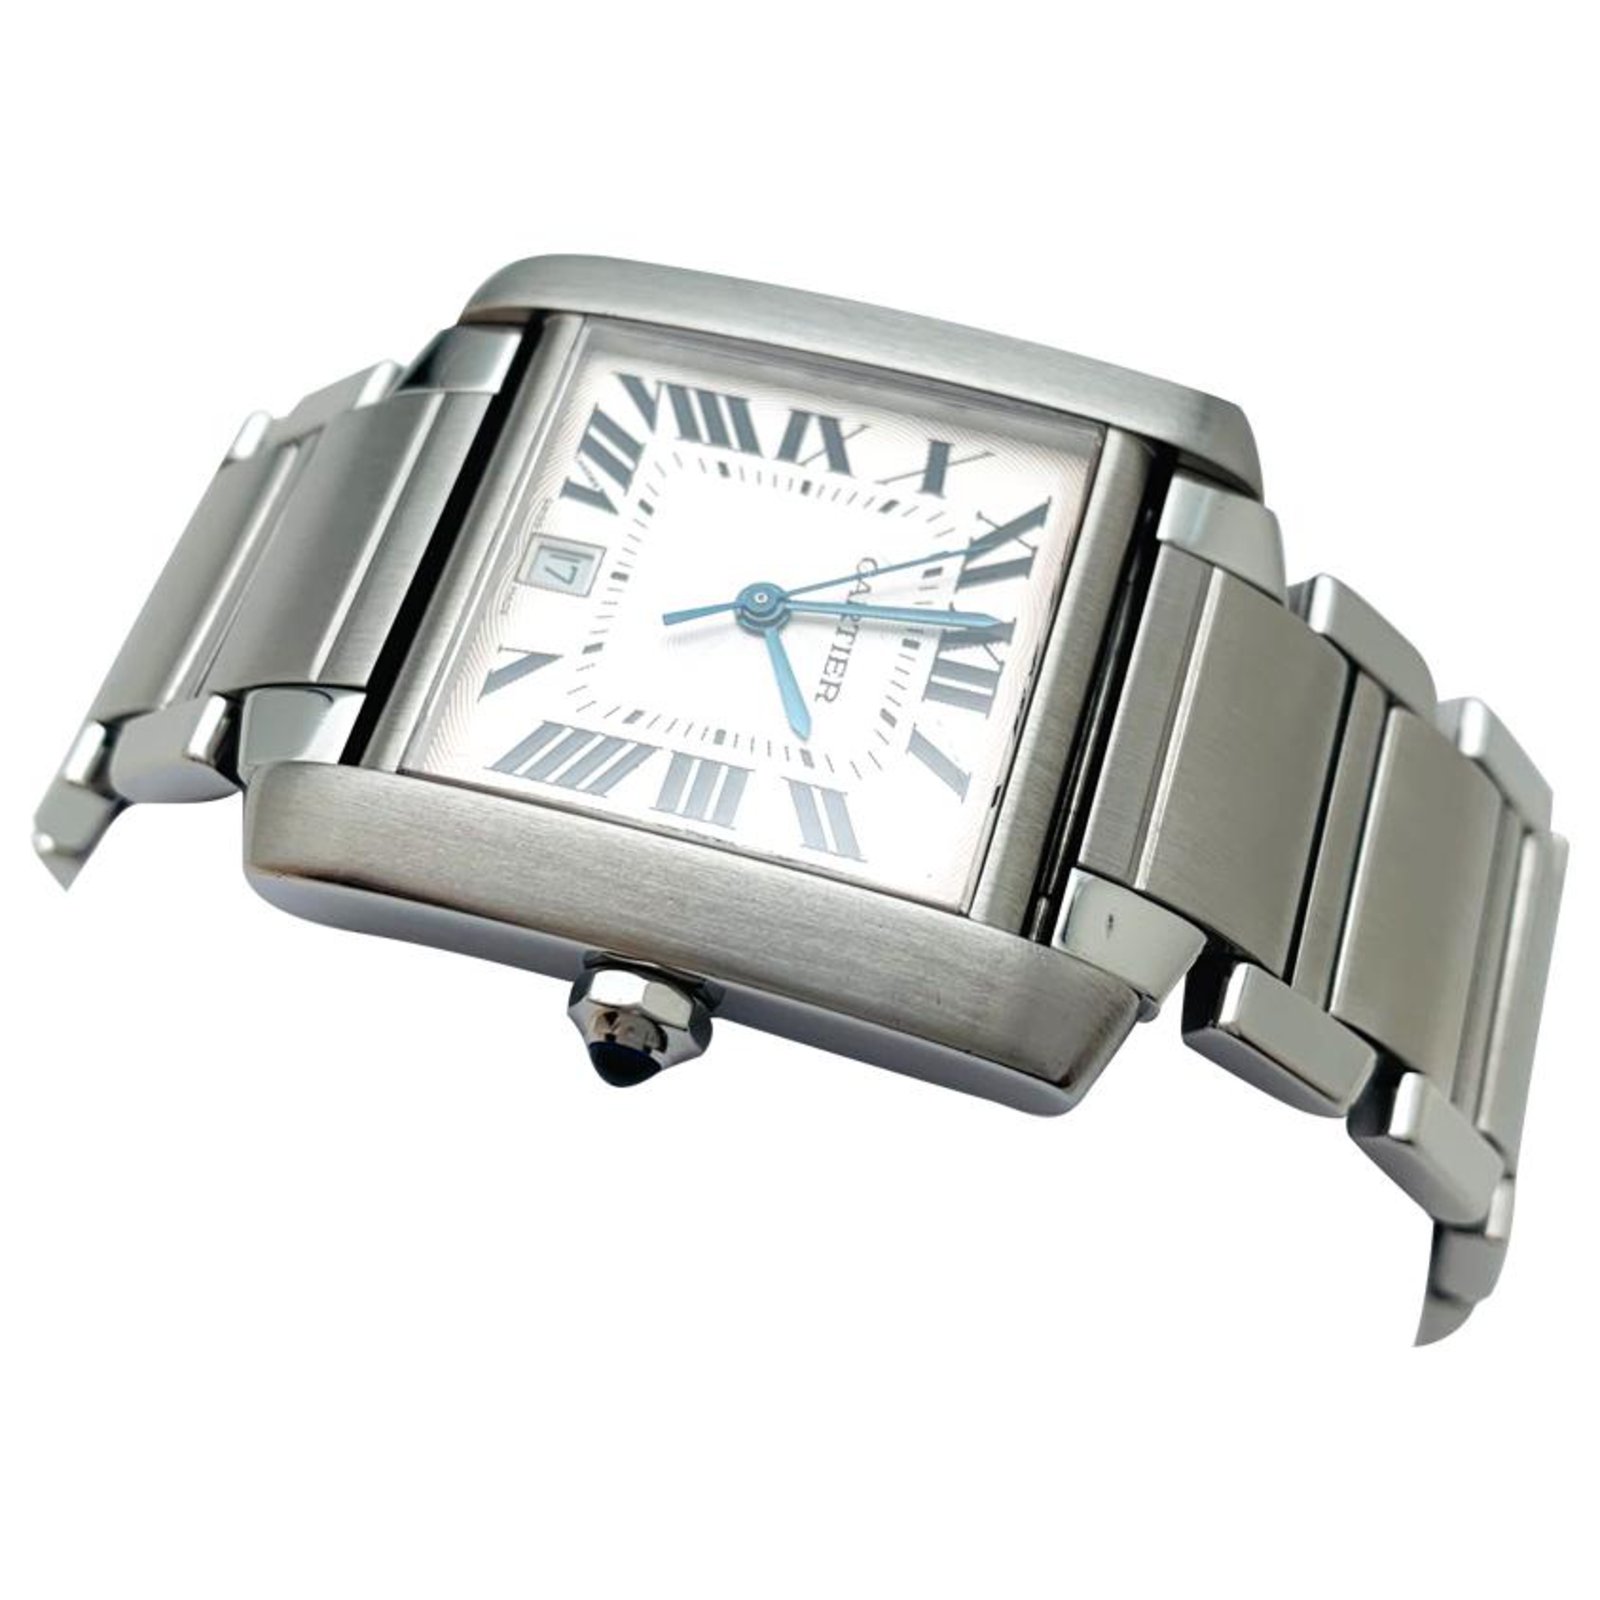 relogio cartier french tank